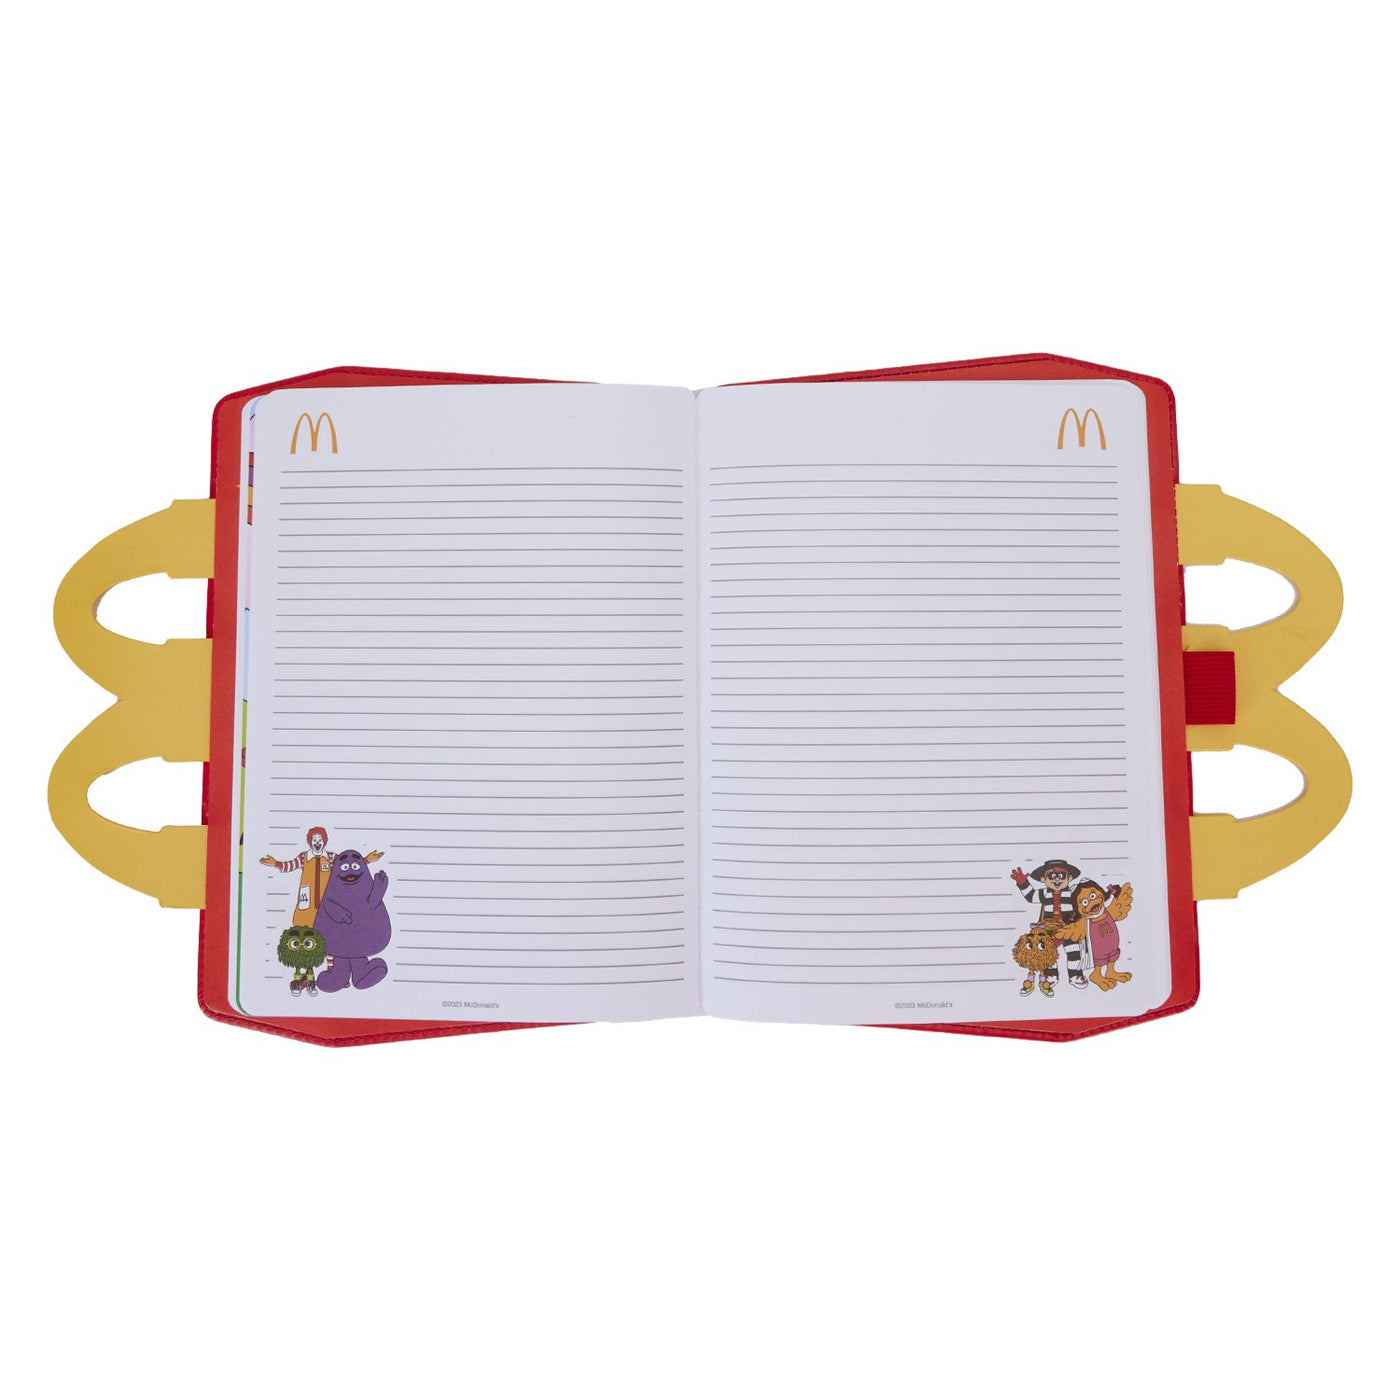 Loungefly McDonald's Happy Meal Lunchbox Notebook - Interior Notebook